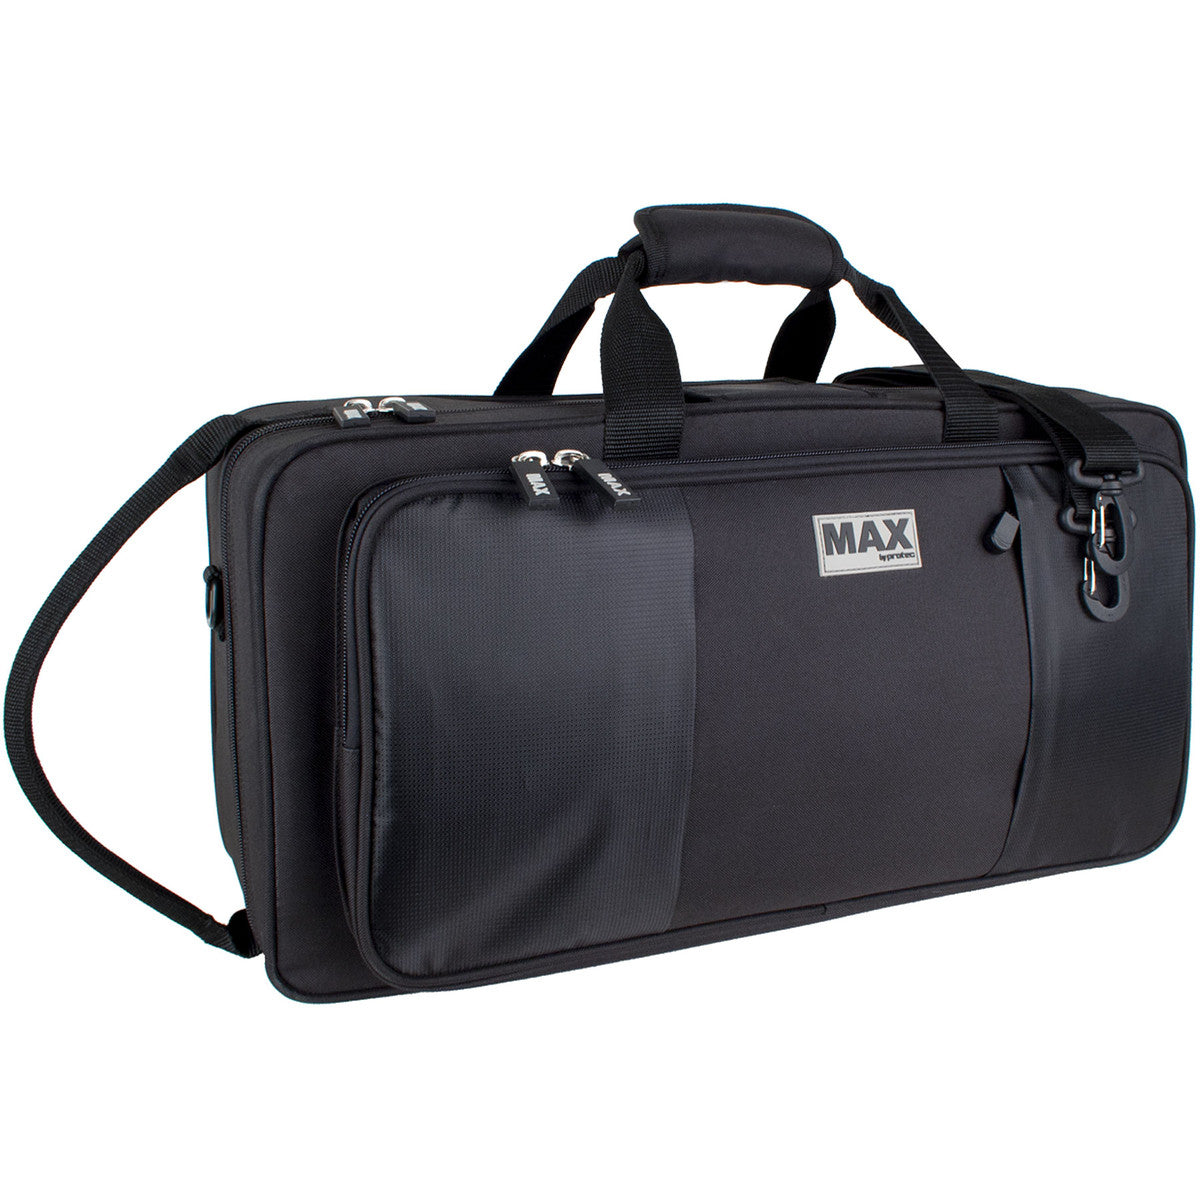 Protec Max Trumpet case with mute space - Black